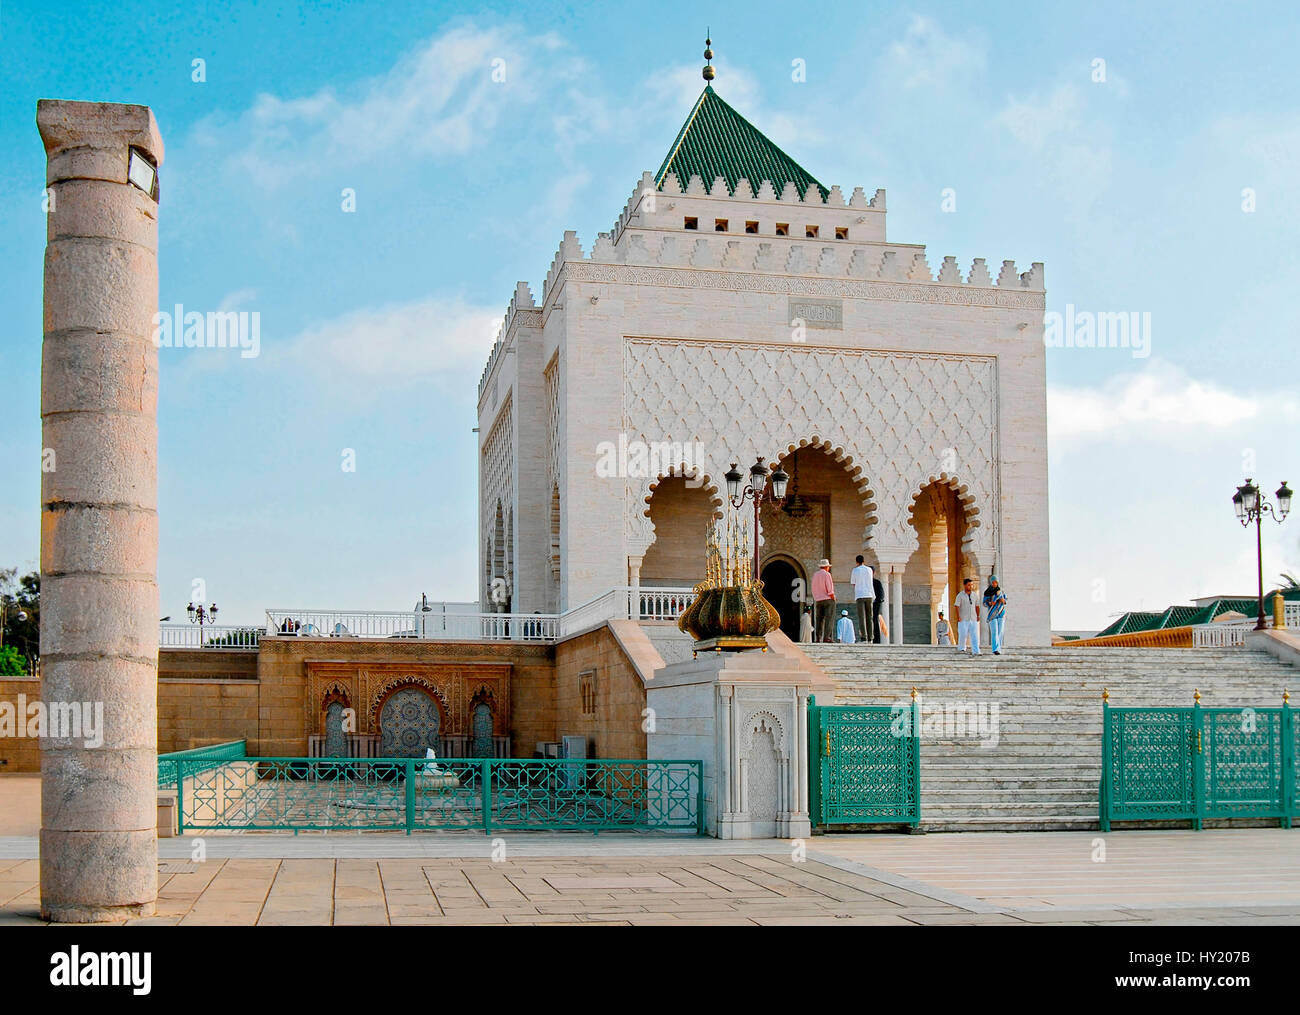 Image of the Mausoleum of Mohammed V in Rabat, Morocco. Stock Photo